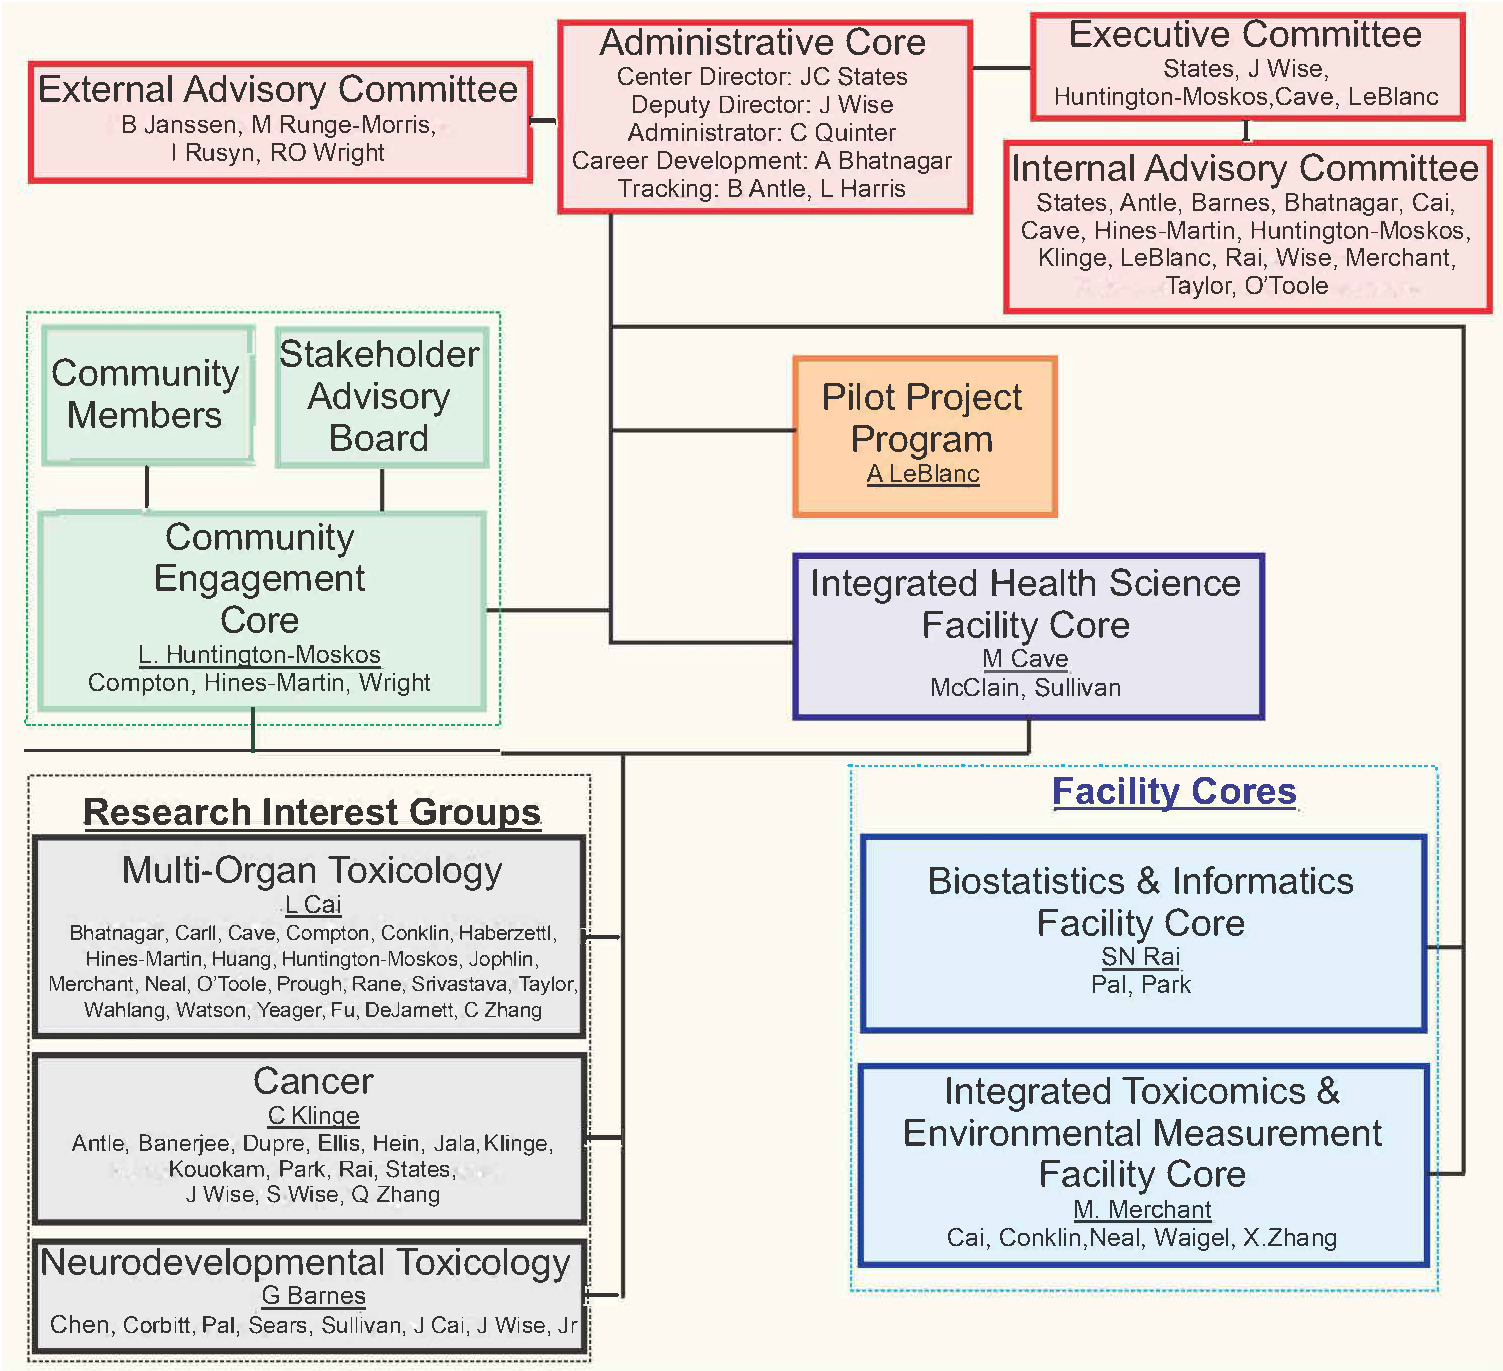 CIEHS organizational chart for the structure of CIEHS. Separated by: External Advisory Committee, Administrative Core, Executive Committee, Internal Advisory Committee, Pilot Project Program, Integrated Health Science Facility Core, Biostatistics & Informatics Facility Core, Integrated Toxicomics & Environmental Measurement Facility Core, Community Engagement Core (Community members & Stakeholder Advisory Board), Research Interest Groups (multi-organ Toxicology, Cancer, Neurodevelopmental Toxicology). 